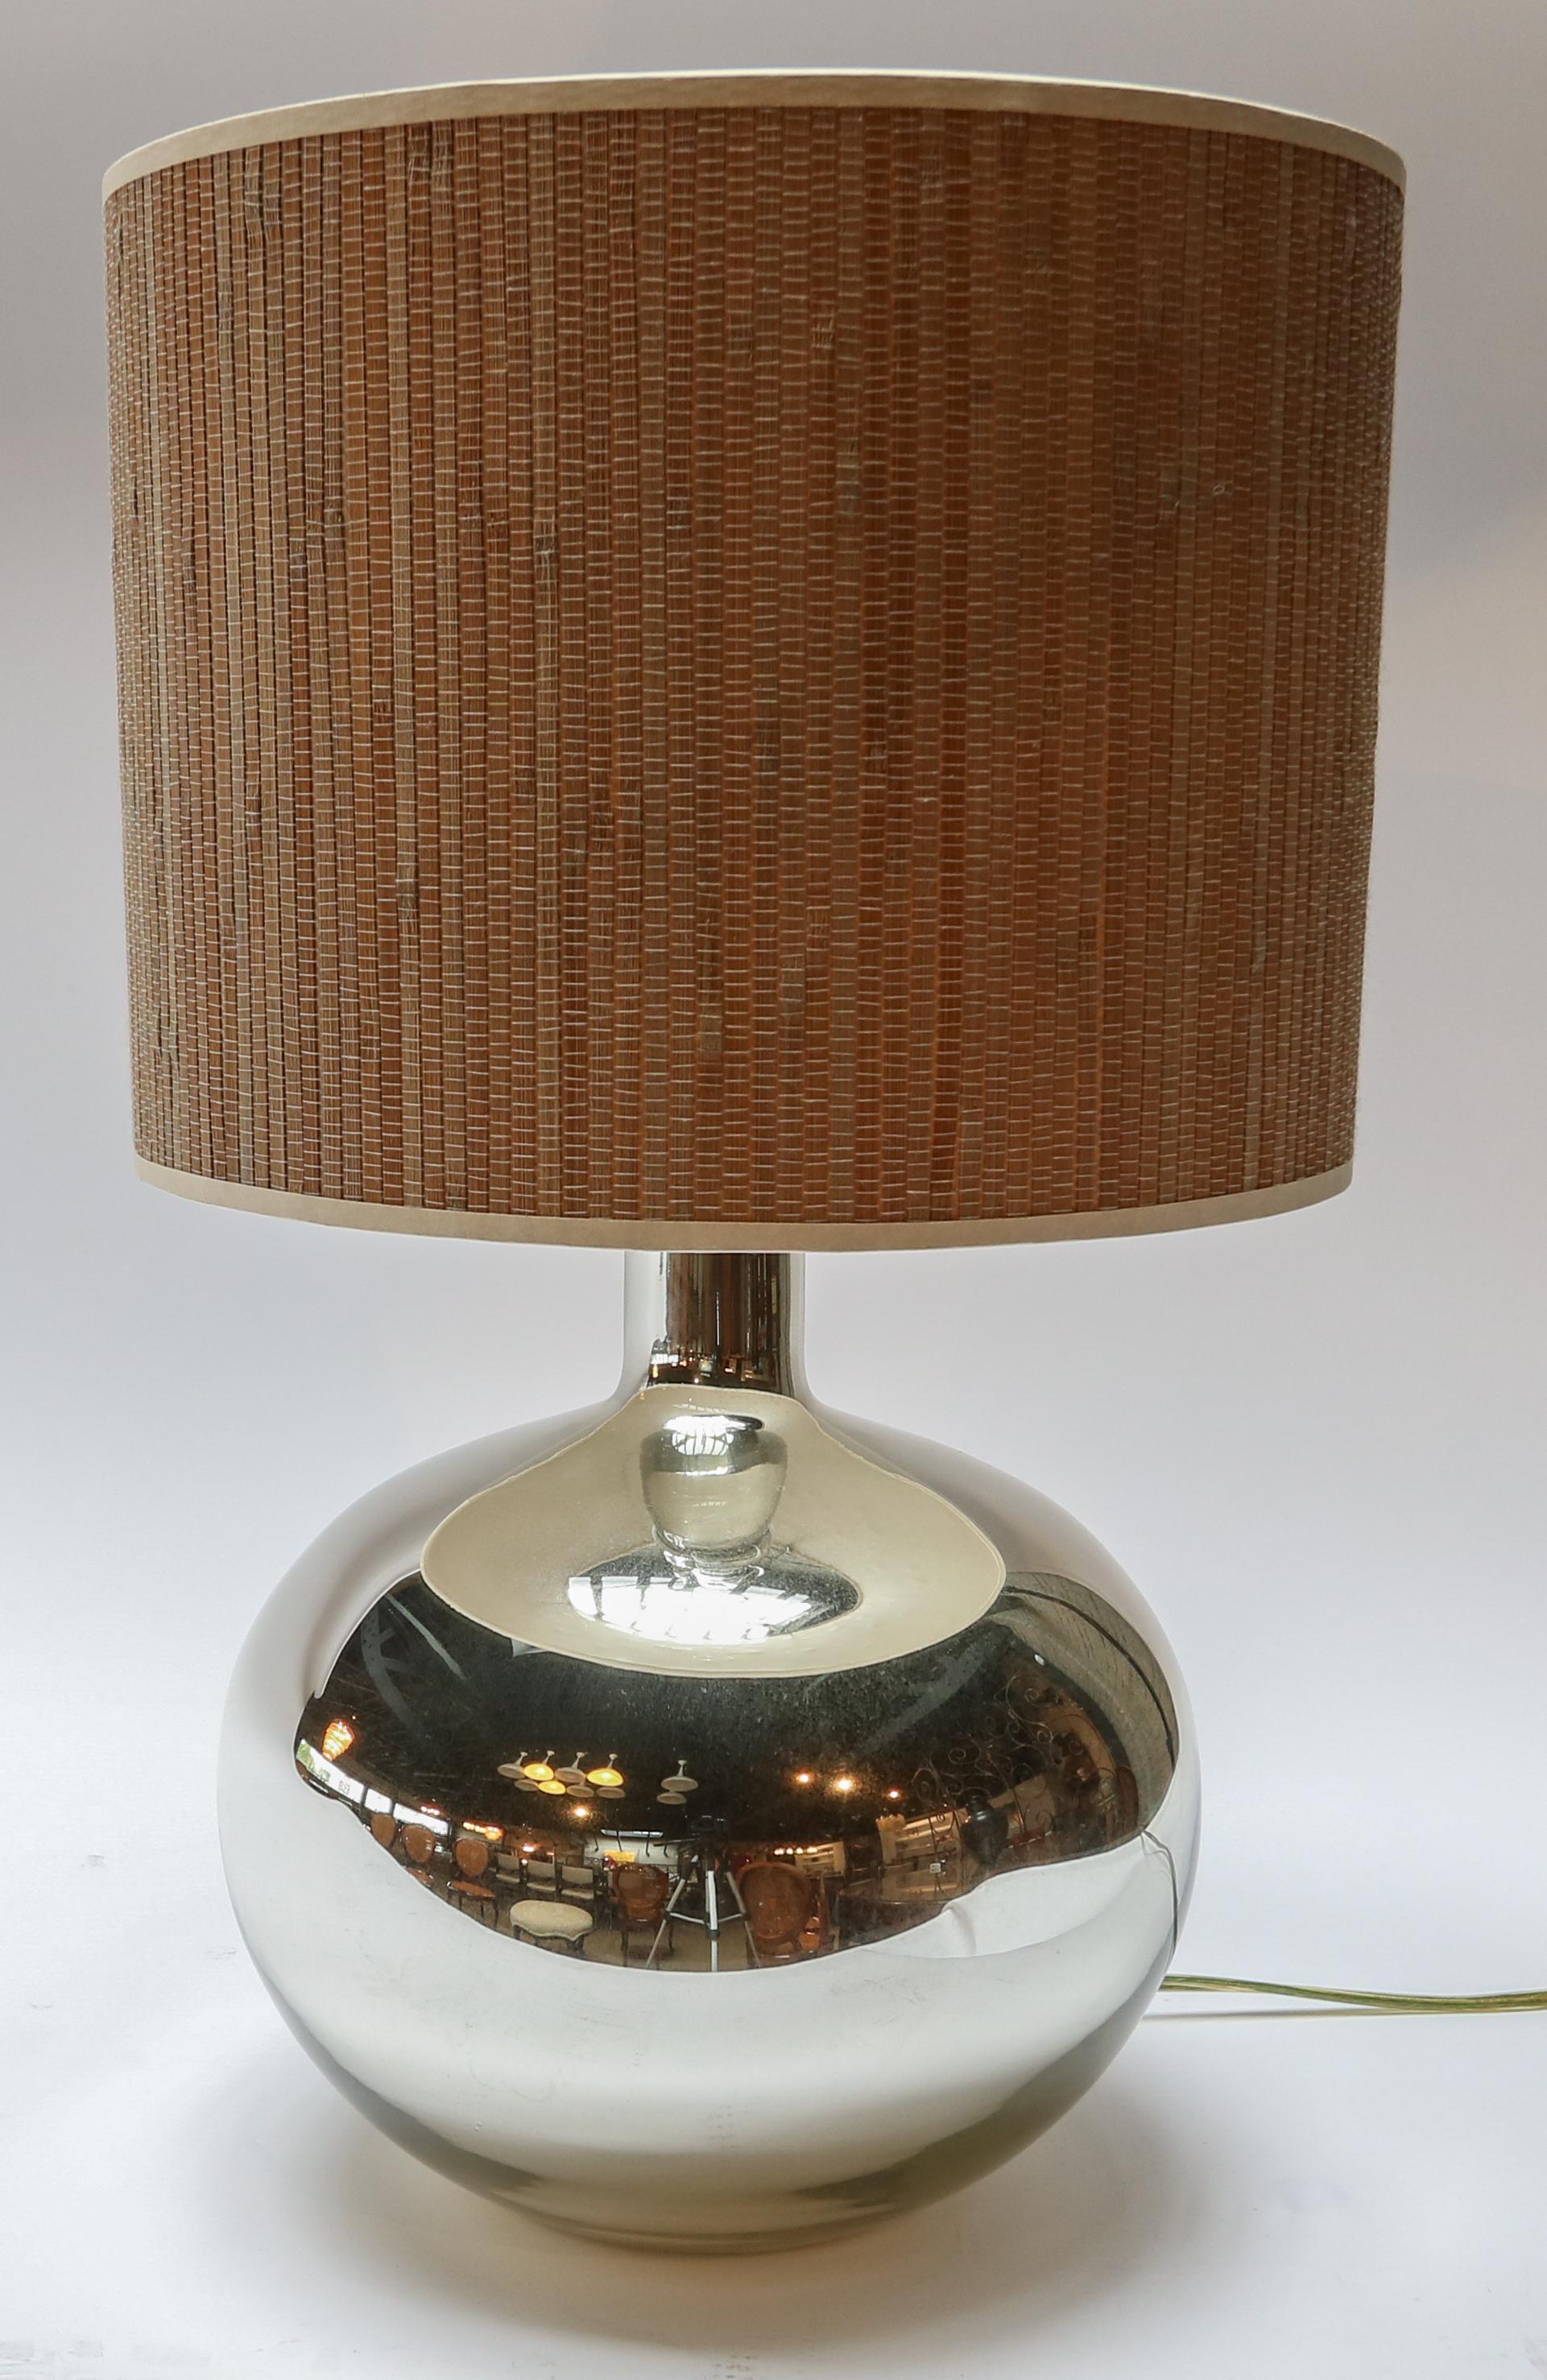 Pair of 1980s chrome table lamps with bamboo shade.